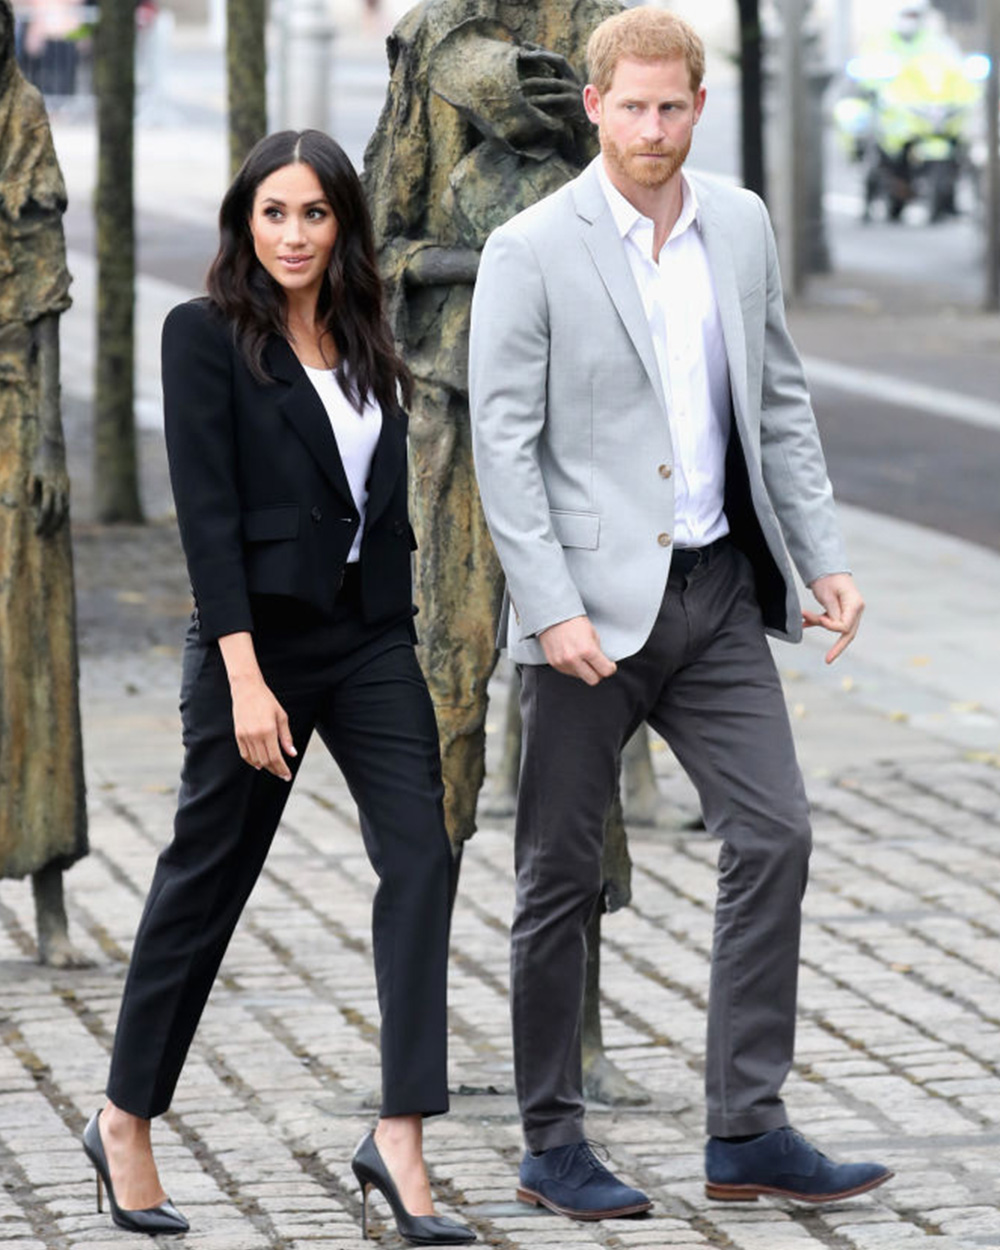 July 11, 2018: The Duchess channelling her former Suits character in a chic pair of black cigarette pants with a matching blazer which she wore over a simple white top.